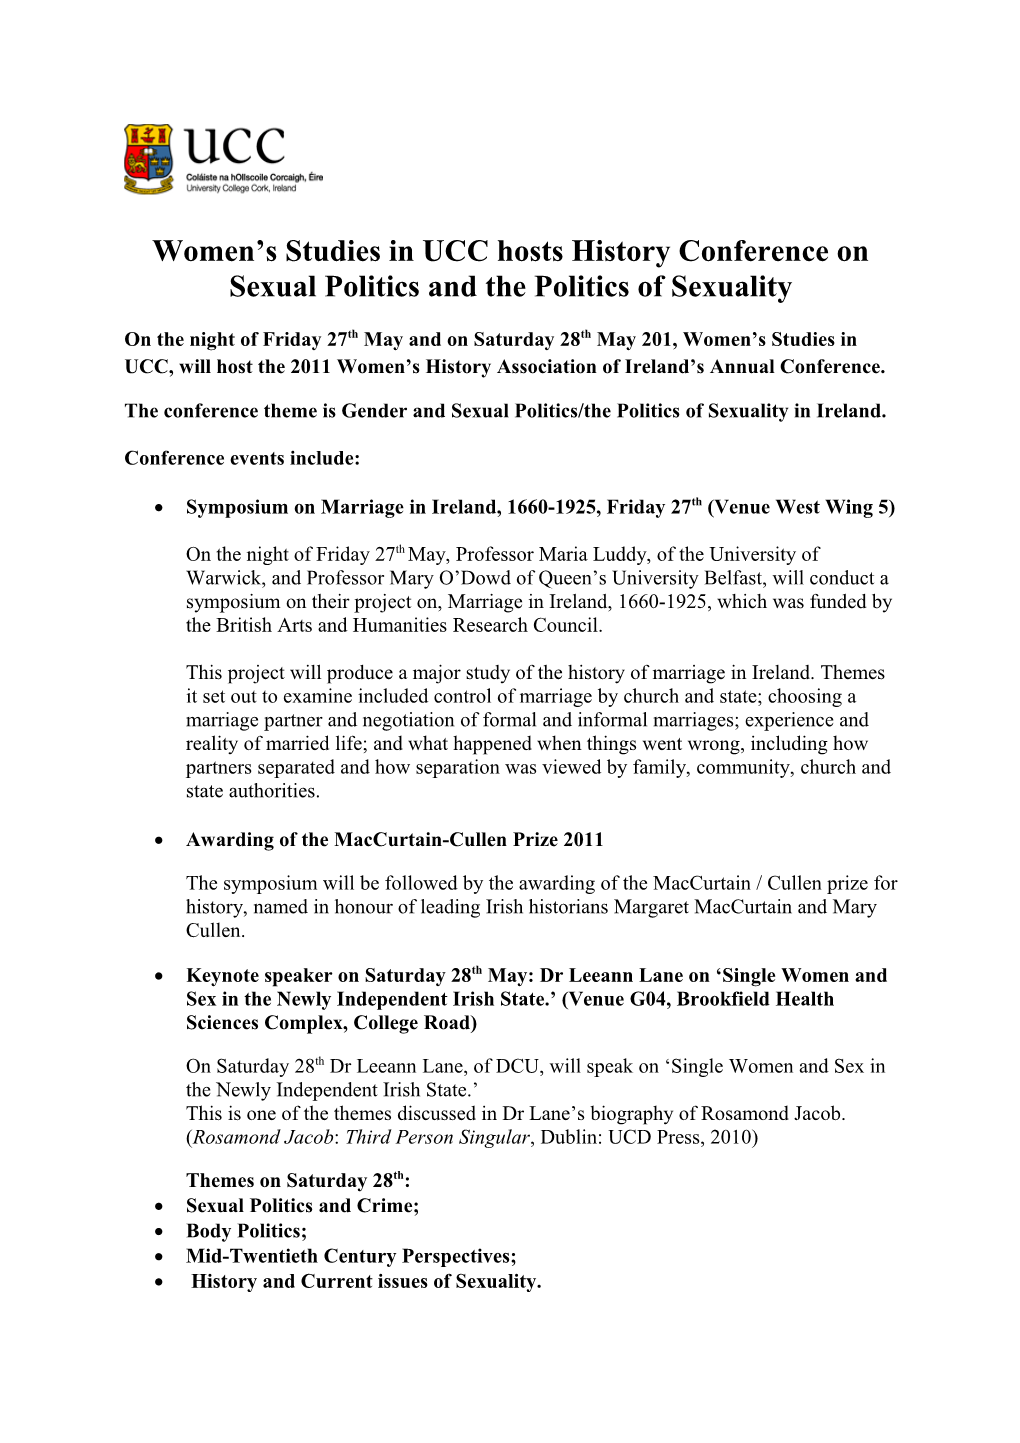 Women S Studies in UCC Hosts History Conference on Sexual Politics and the Politics Of